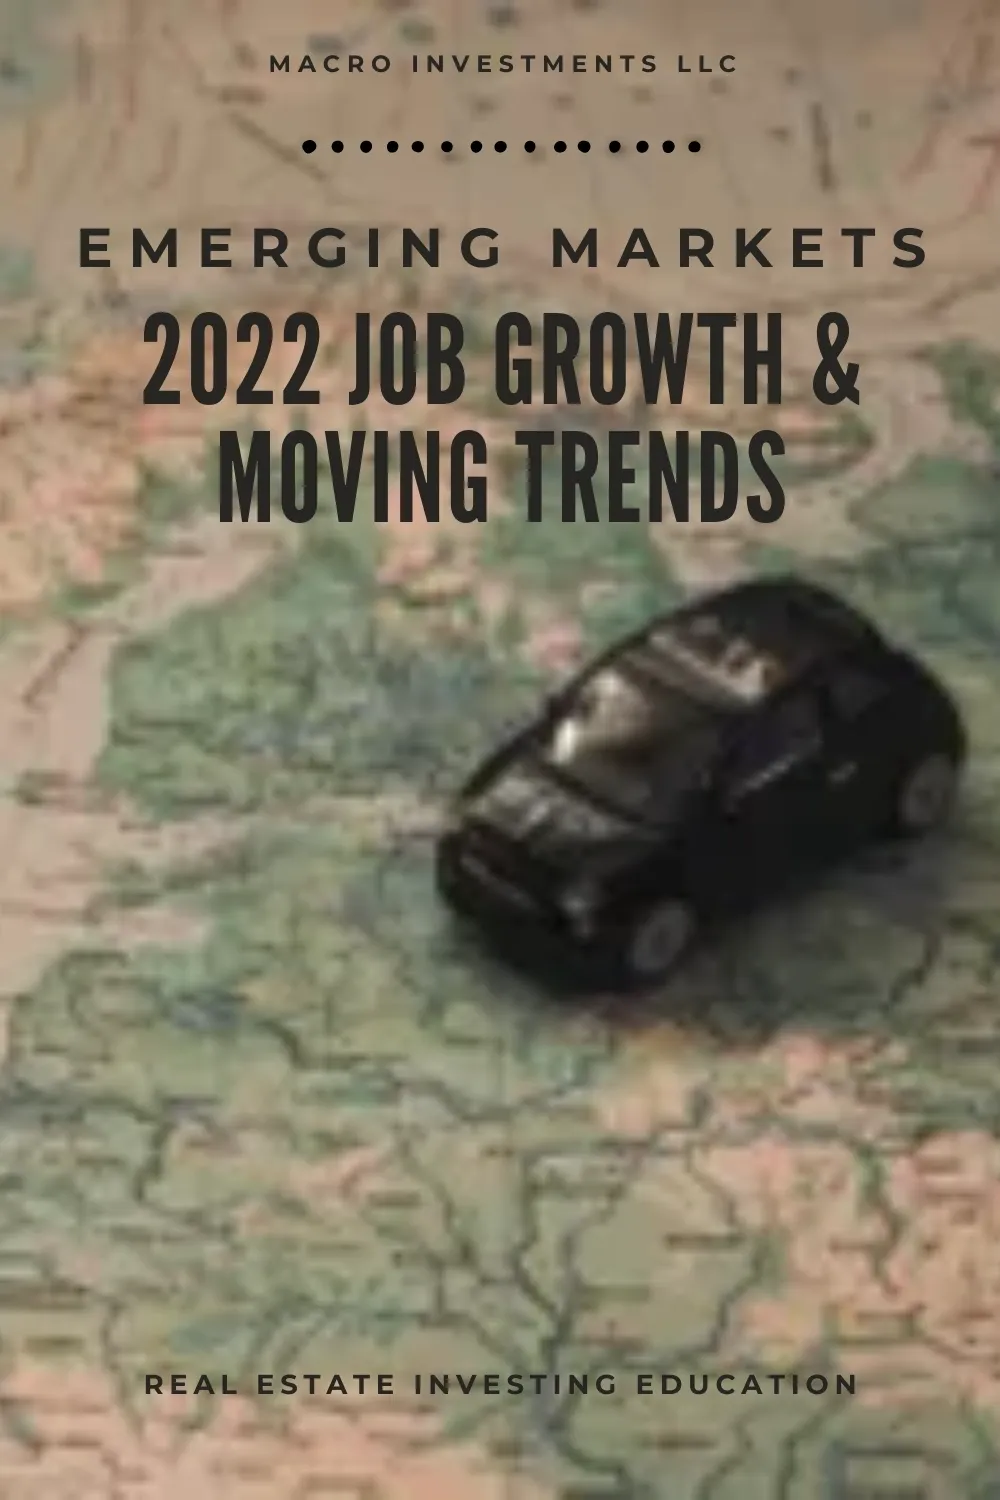 How Job Growth and Moving Trends Help Identify Emerging Real Estate Markets | Blog | InvestingTE.com